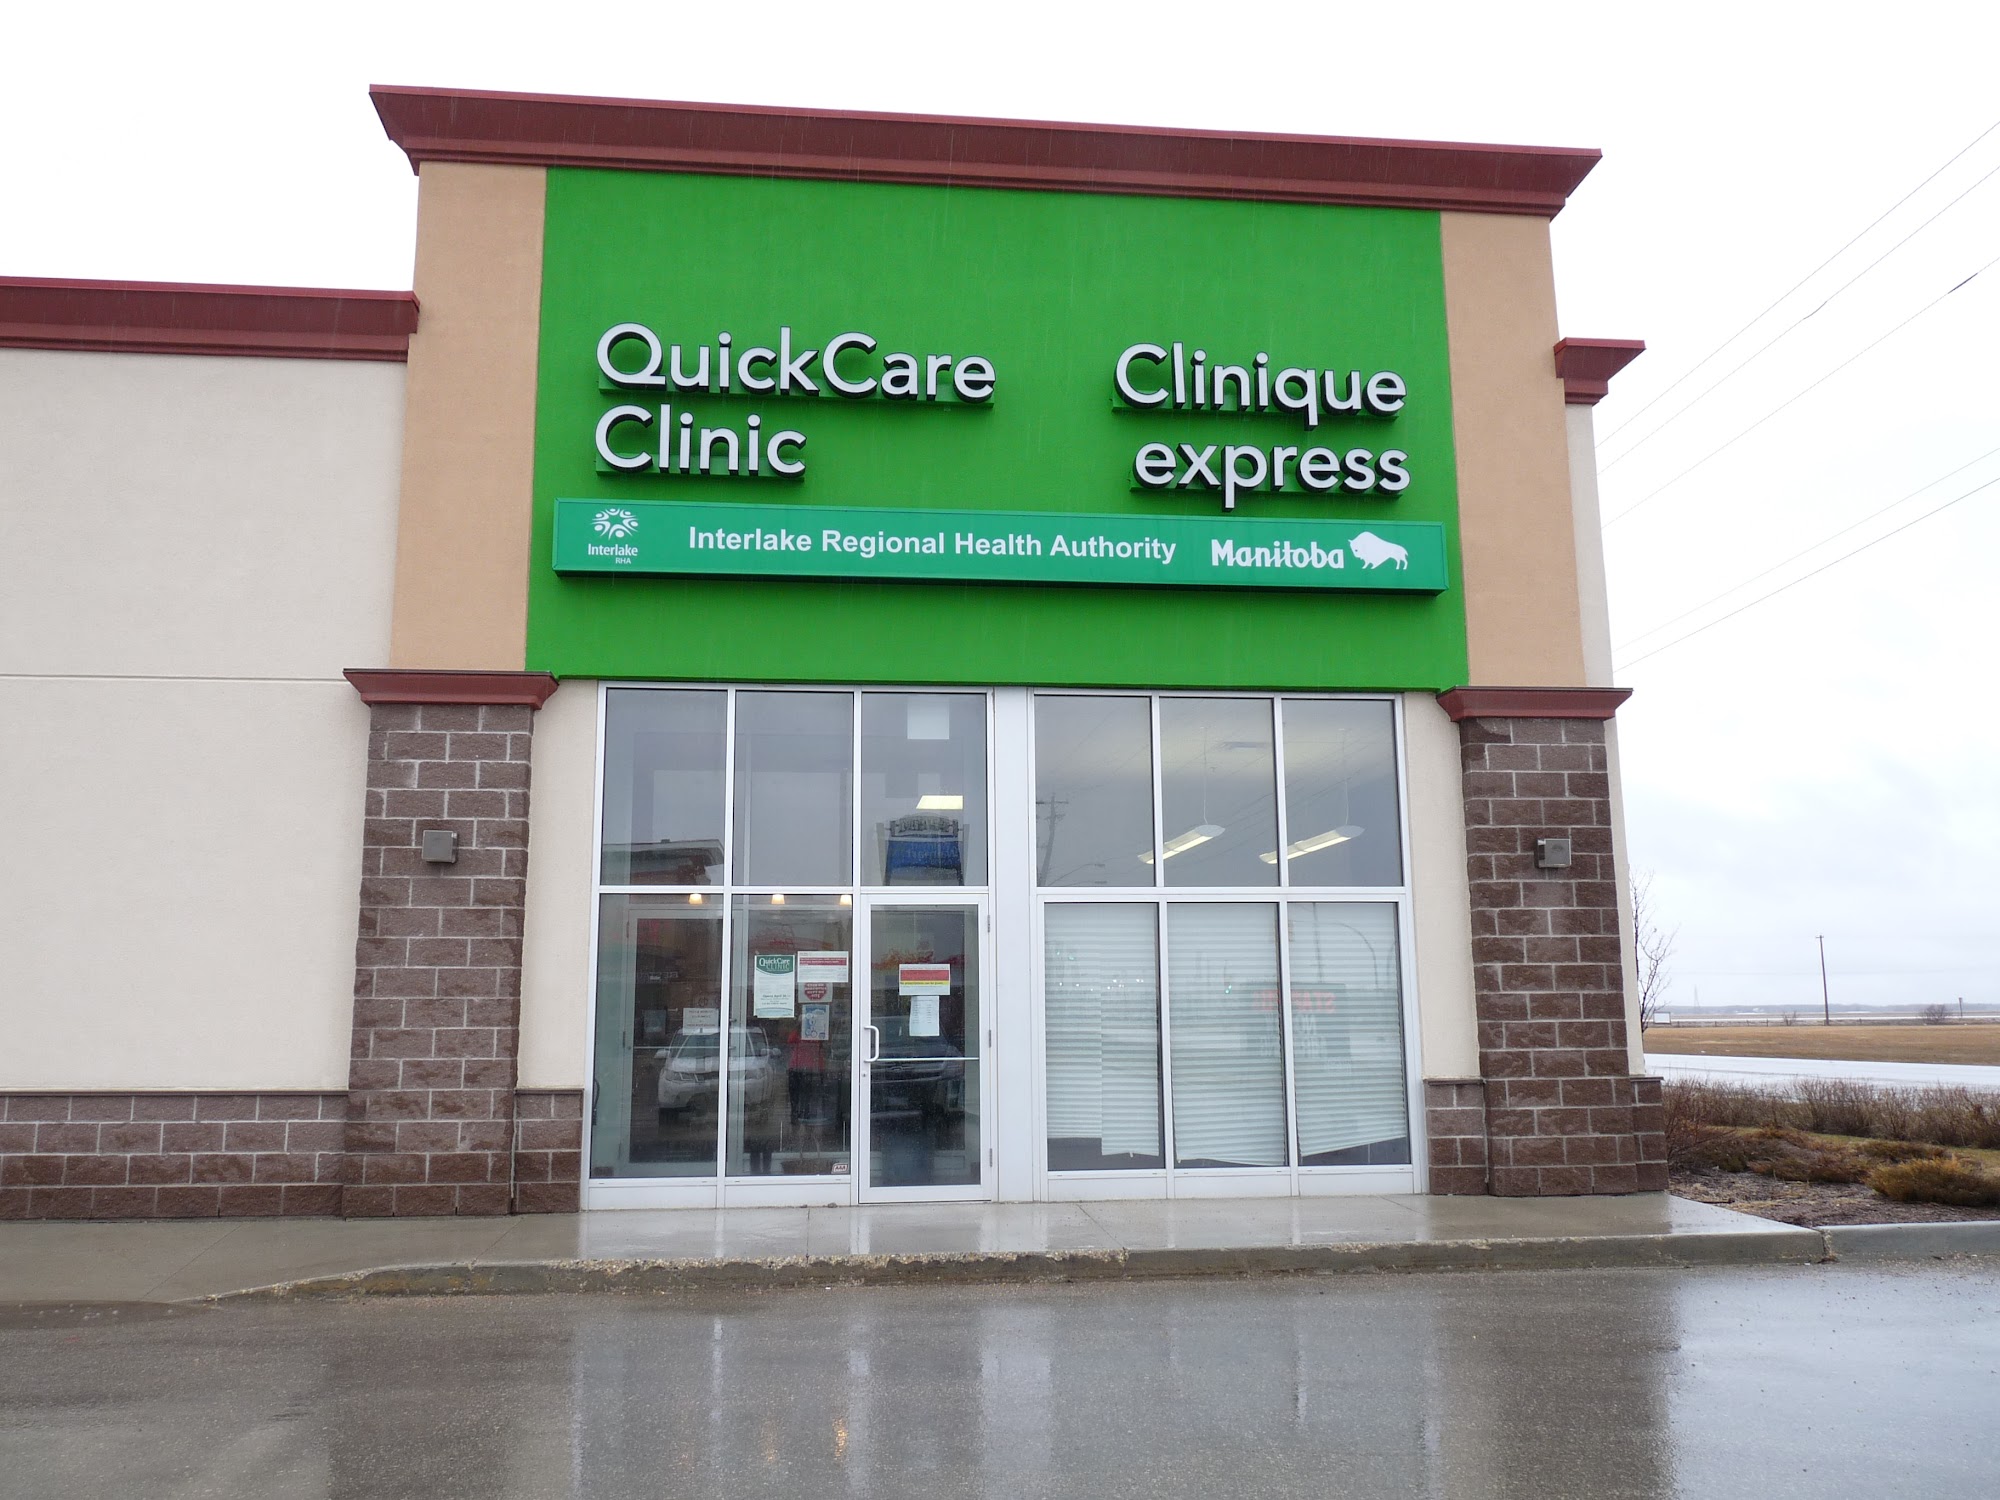 Selkirk Quick Care Clinic 1020 Manitoba Ave #3, Selkirk Manitoba R1A 4M2